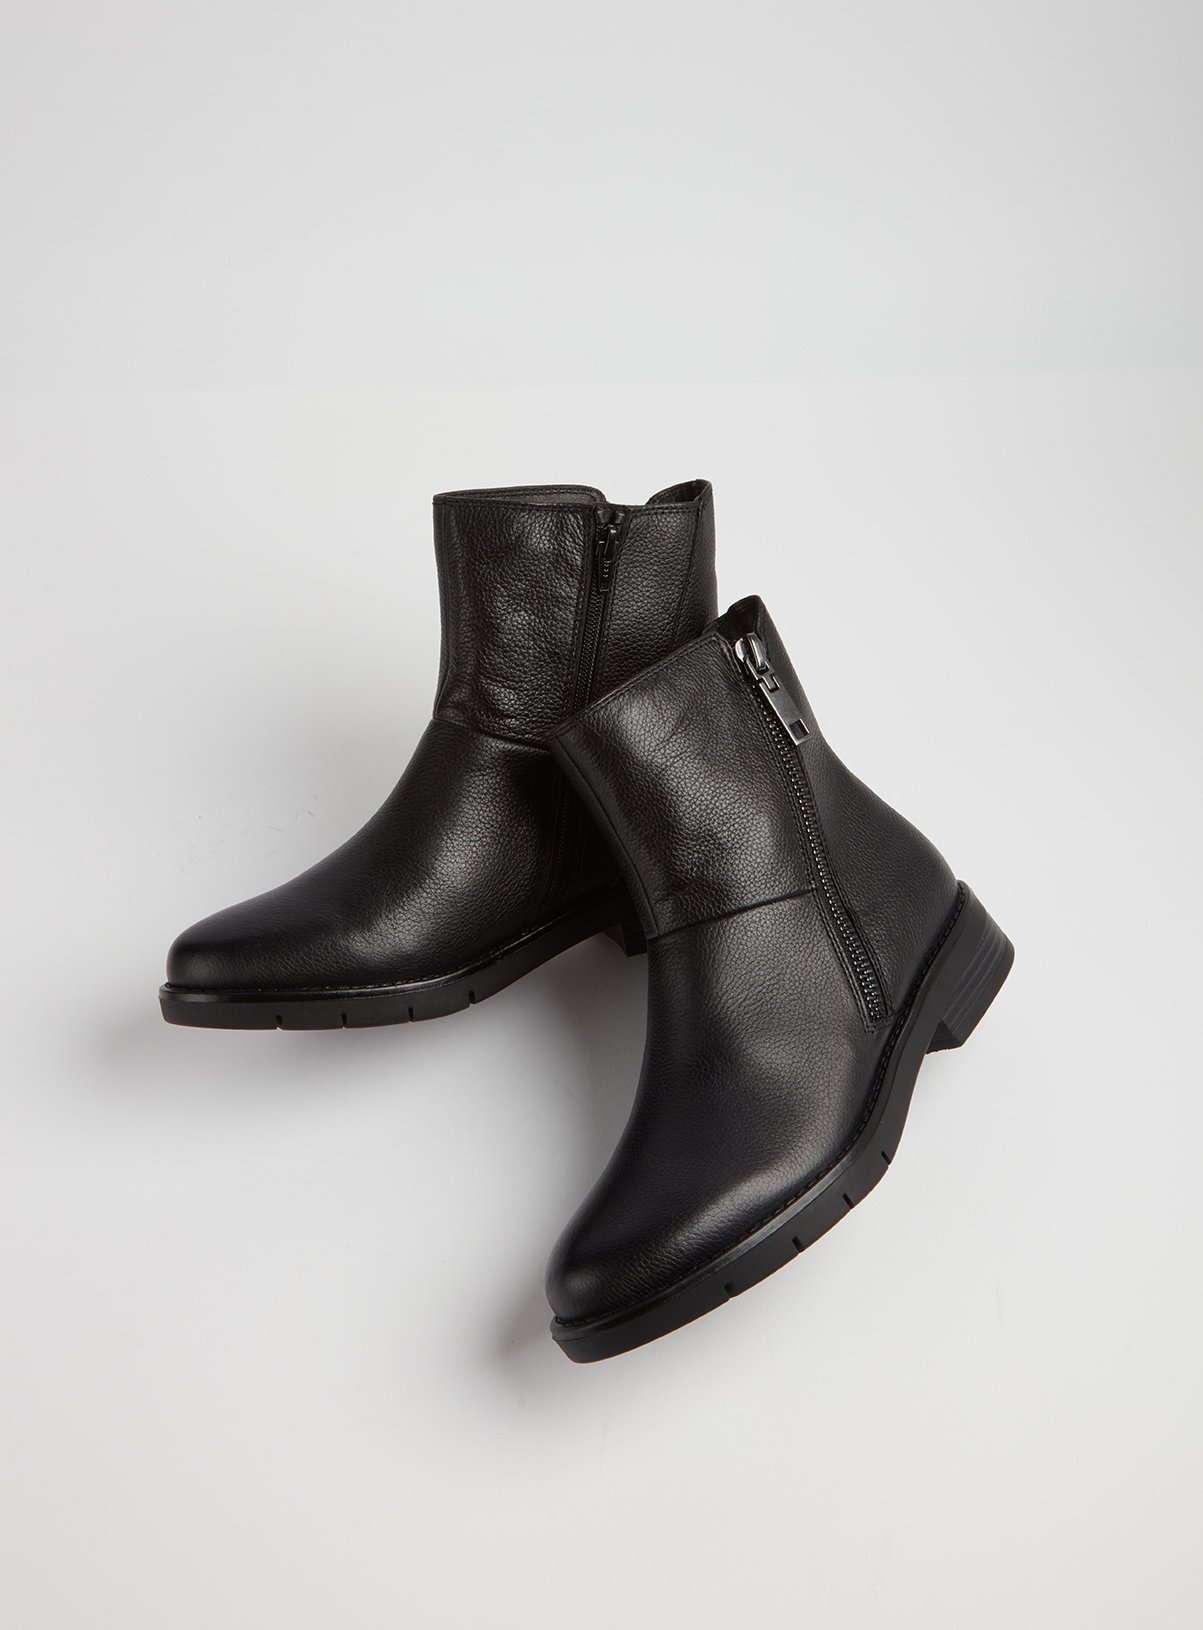 comfortable black leather boots